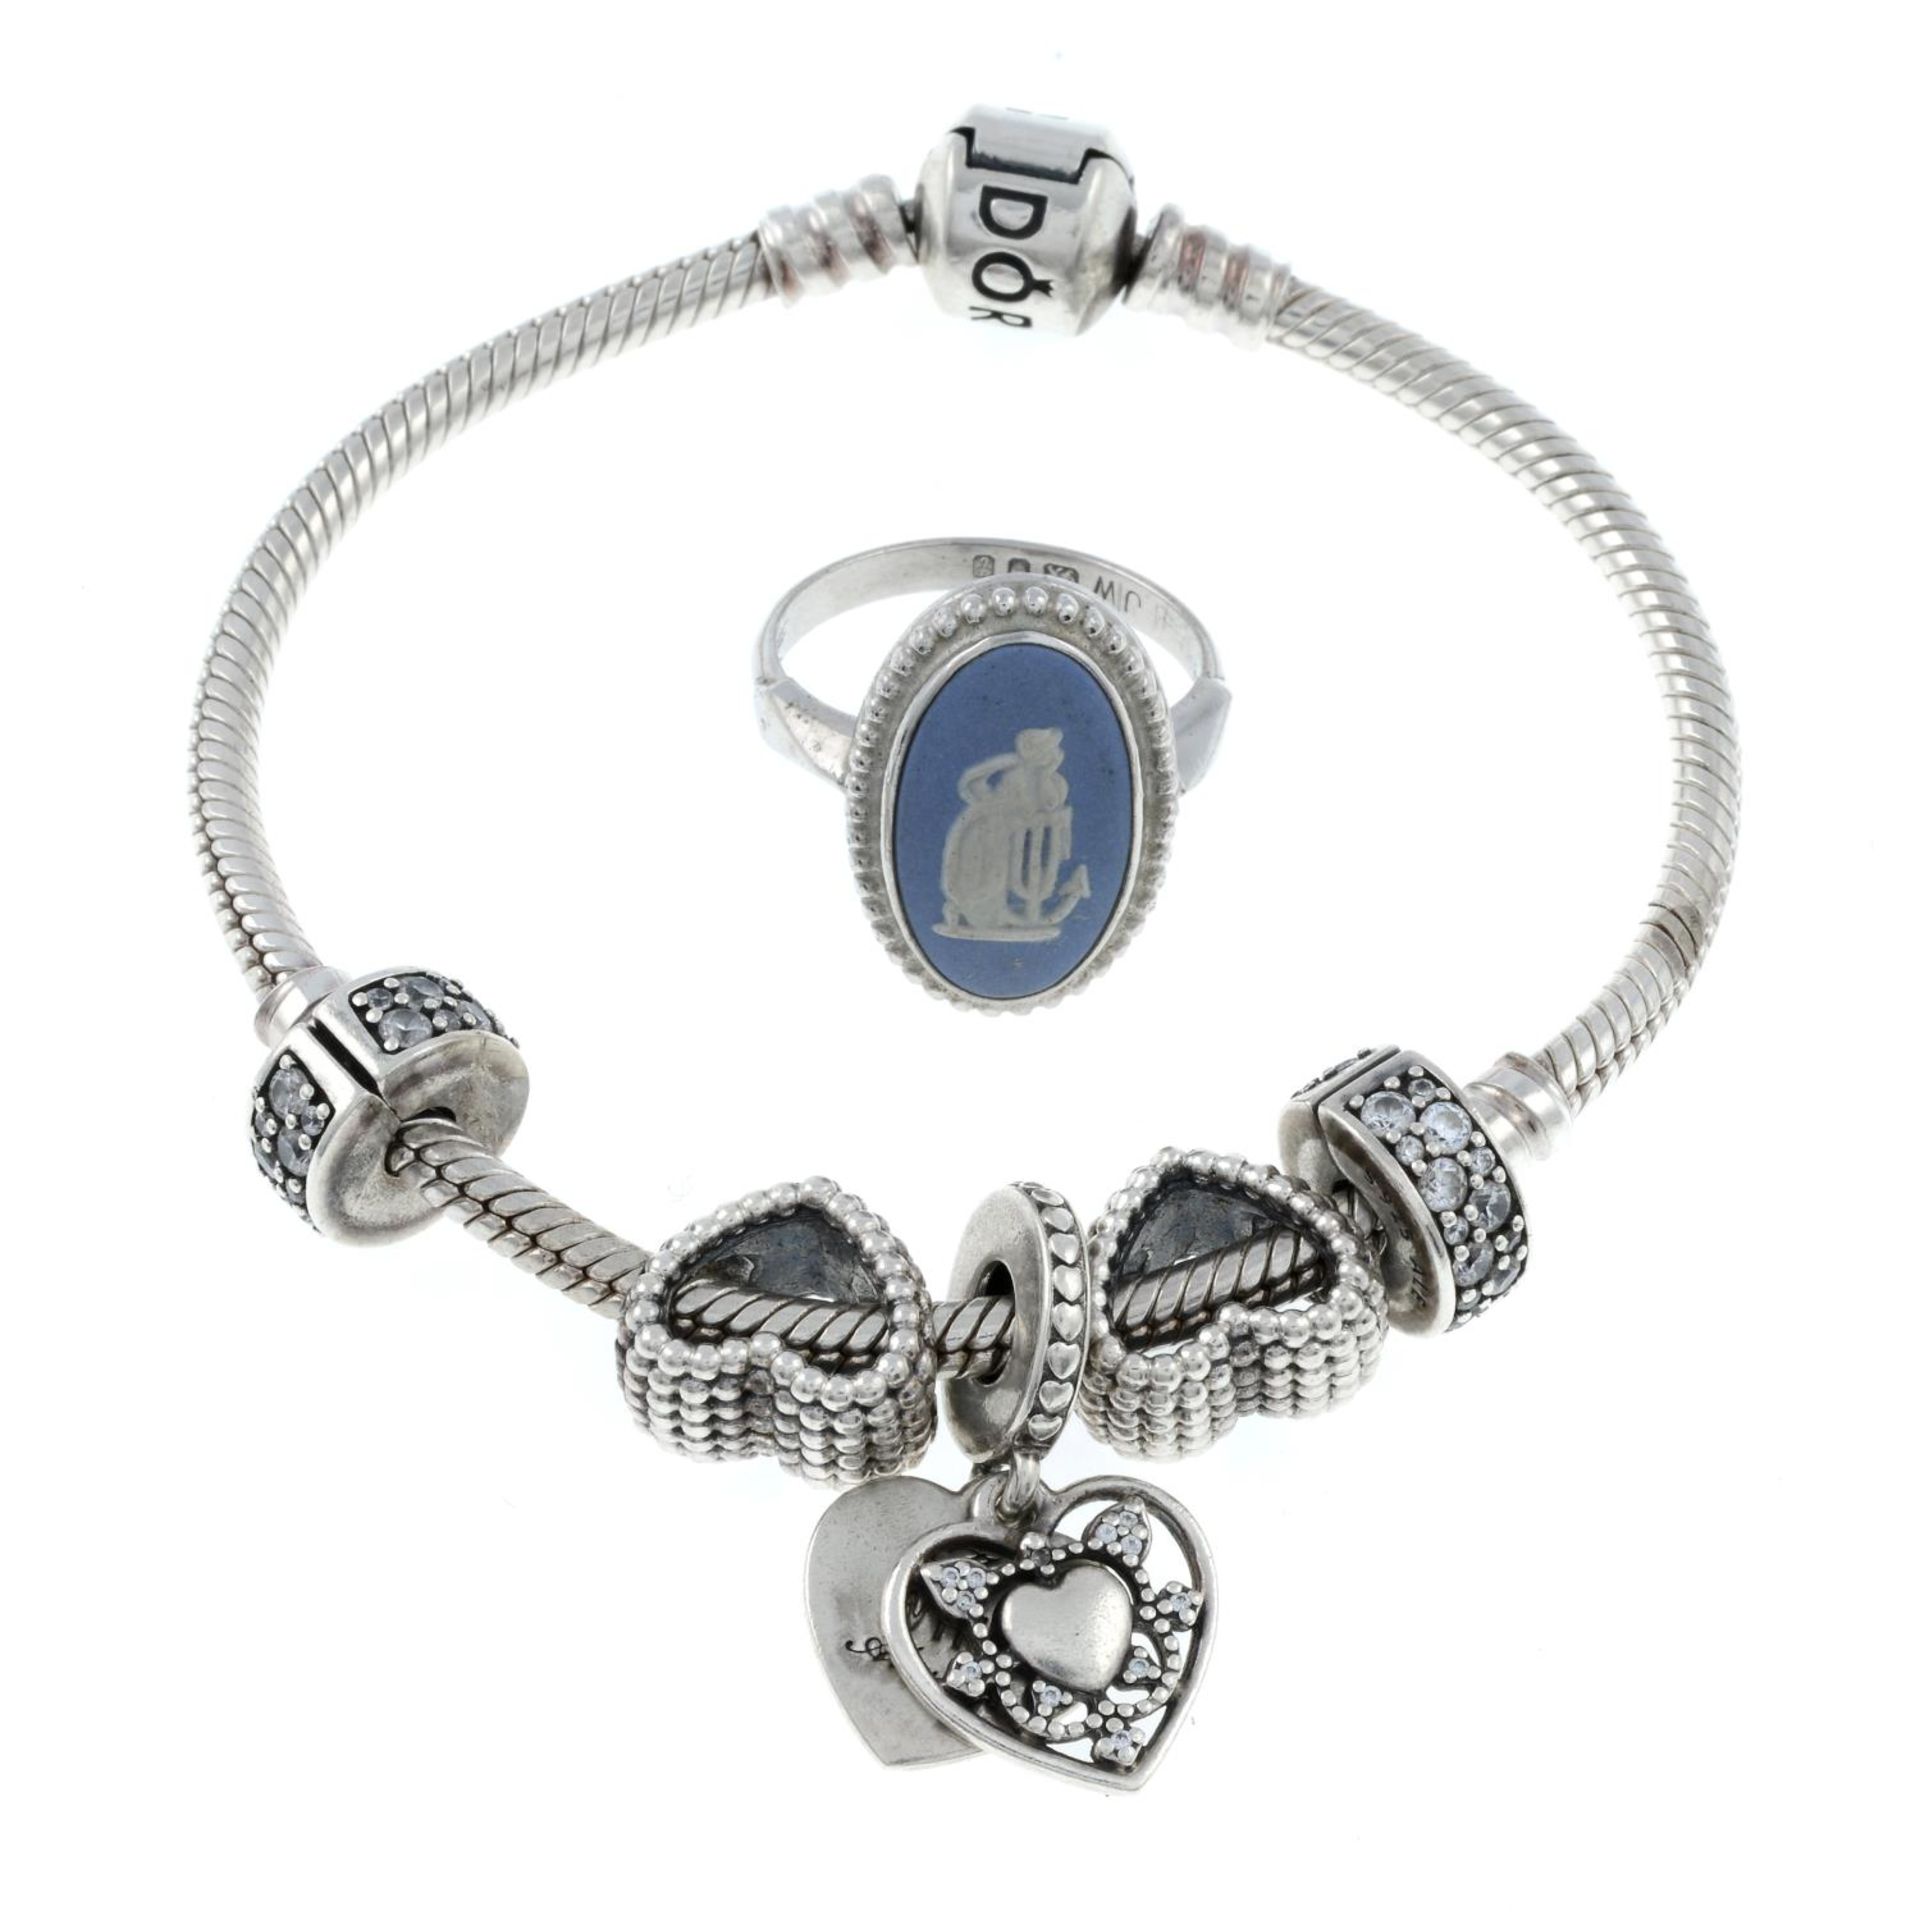 A 'Moments' bracelet, by Pandora and a silver jasperware cameo ring, by Wedgewood.